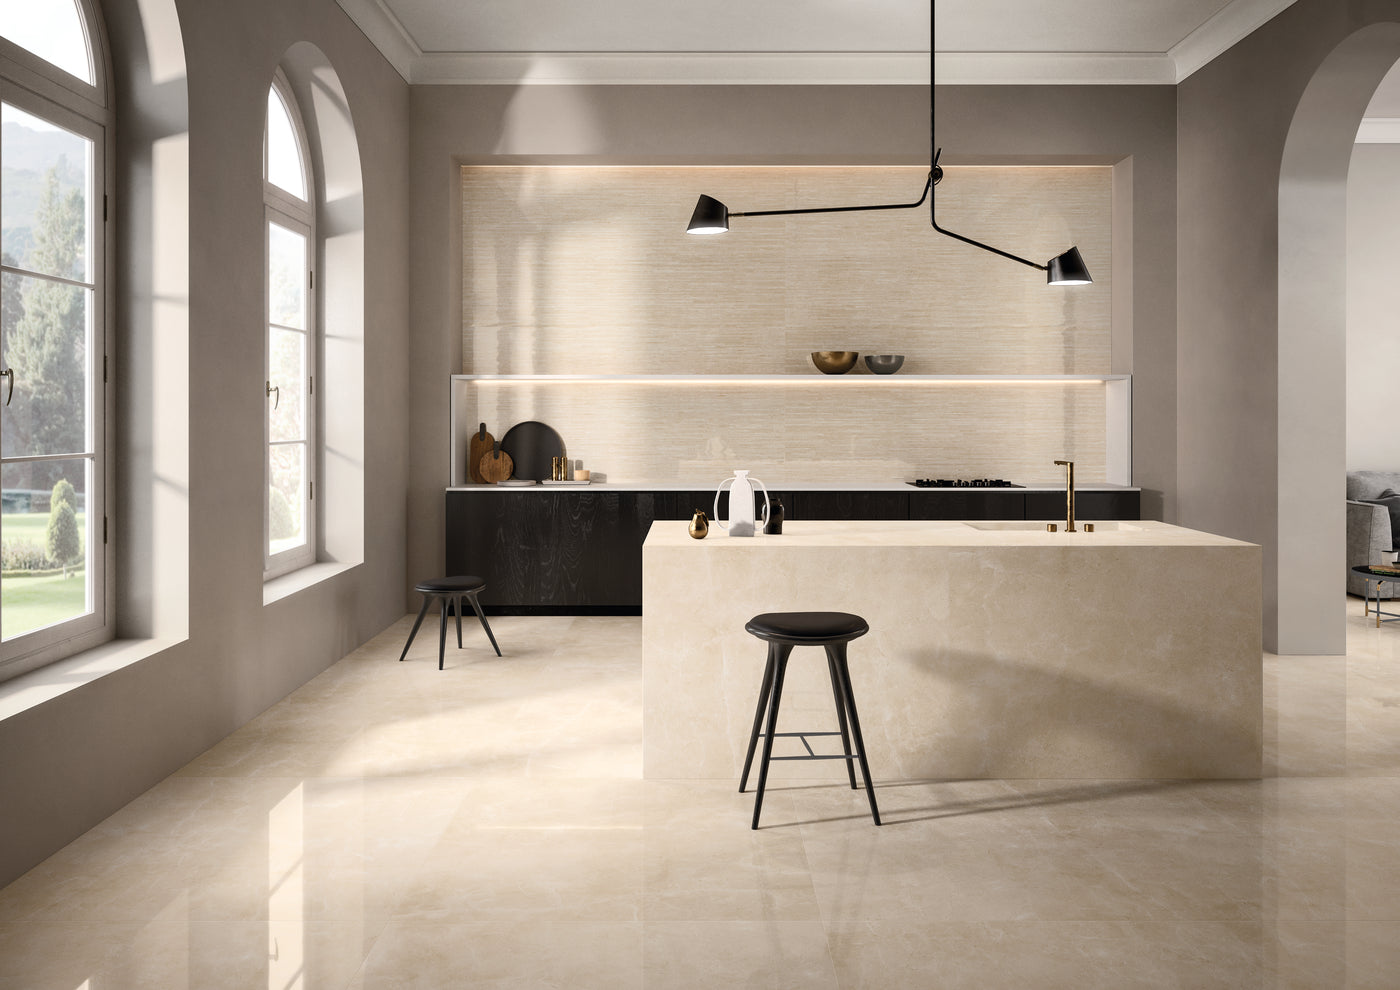 Tele Di Marmo Reloaded Porcelain Large Format Field Tile 24X48 Marfil Polished